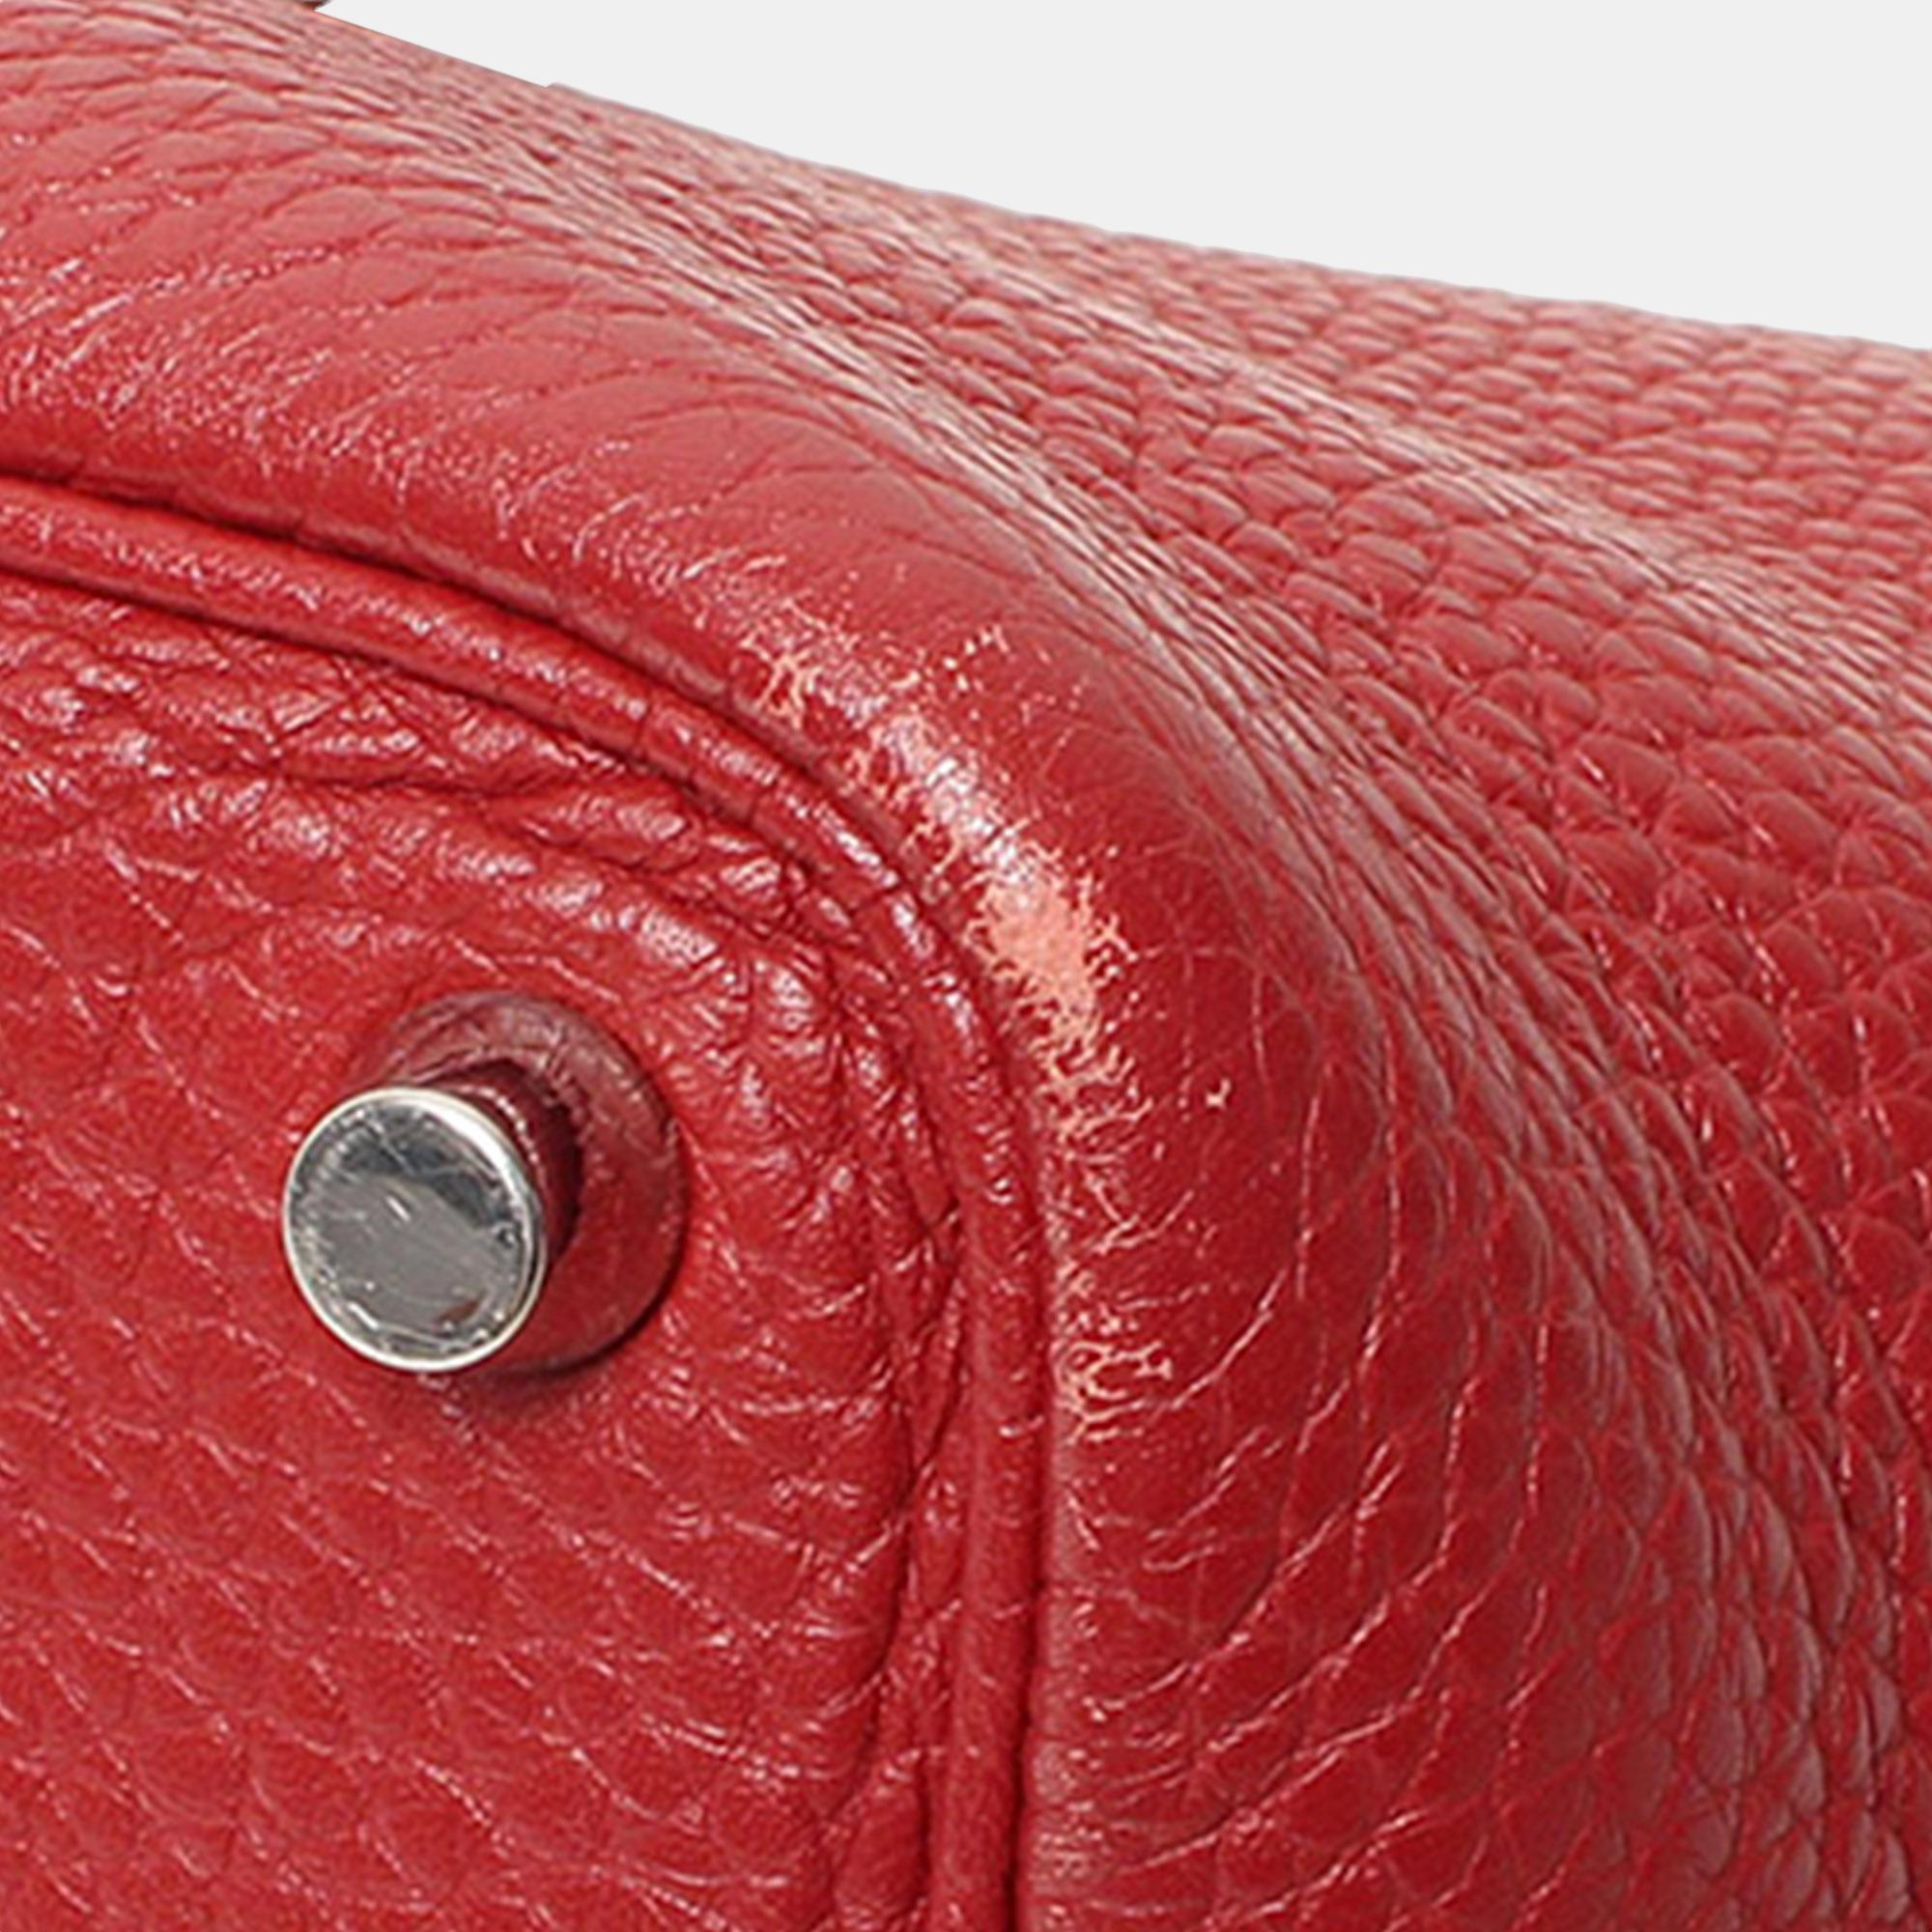 Hermes Red Clemence Picotin PM